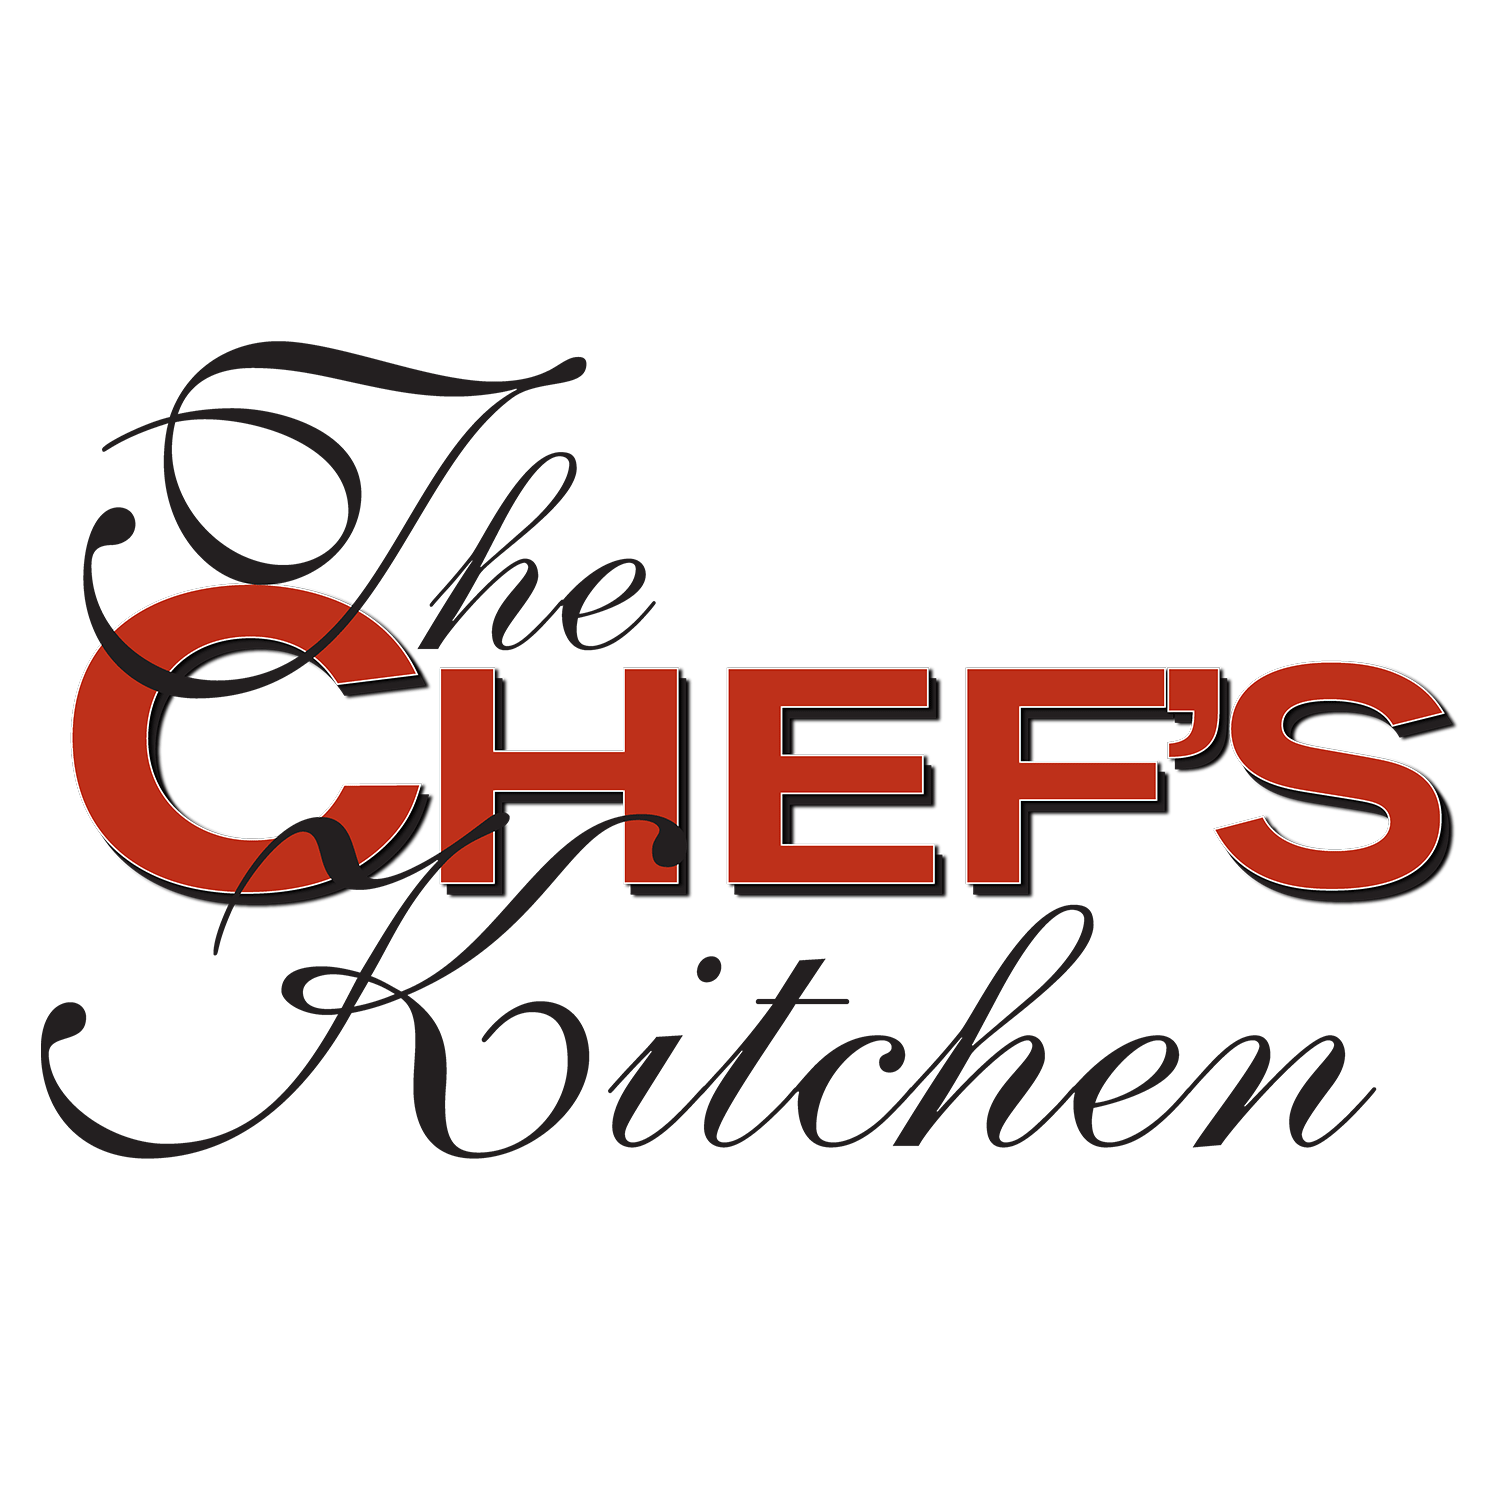 Featured — The Chef's Kitchen